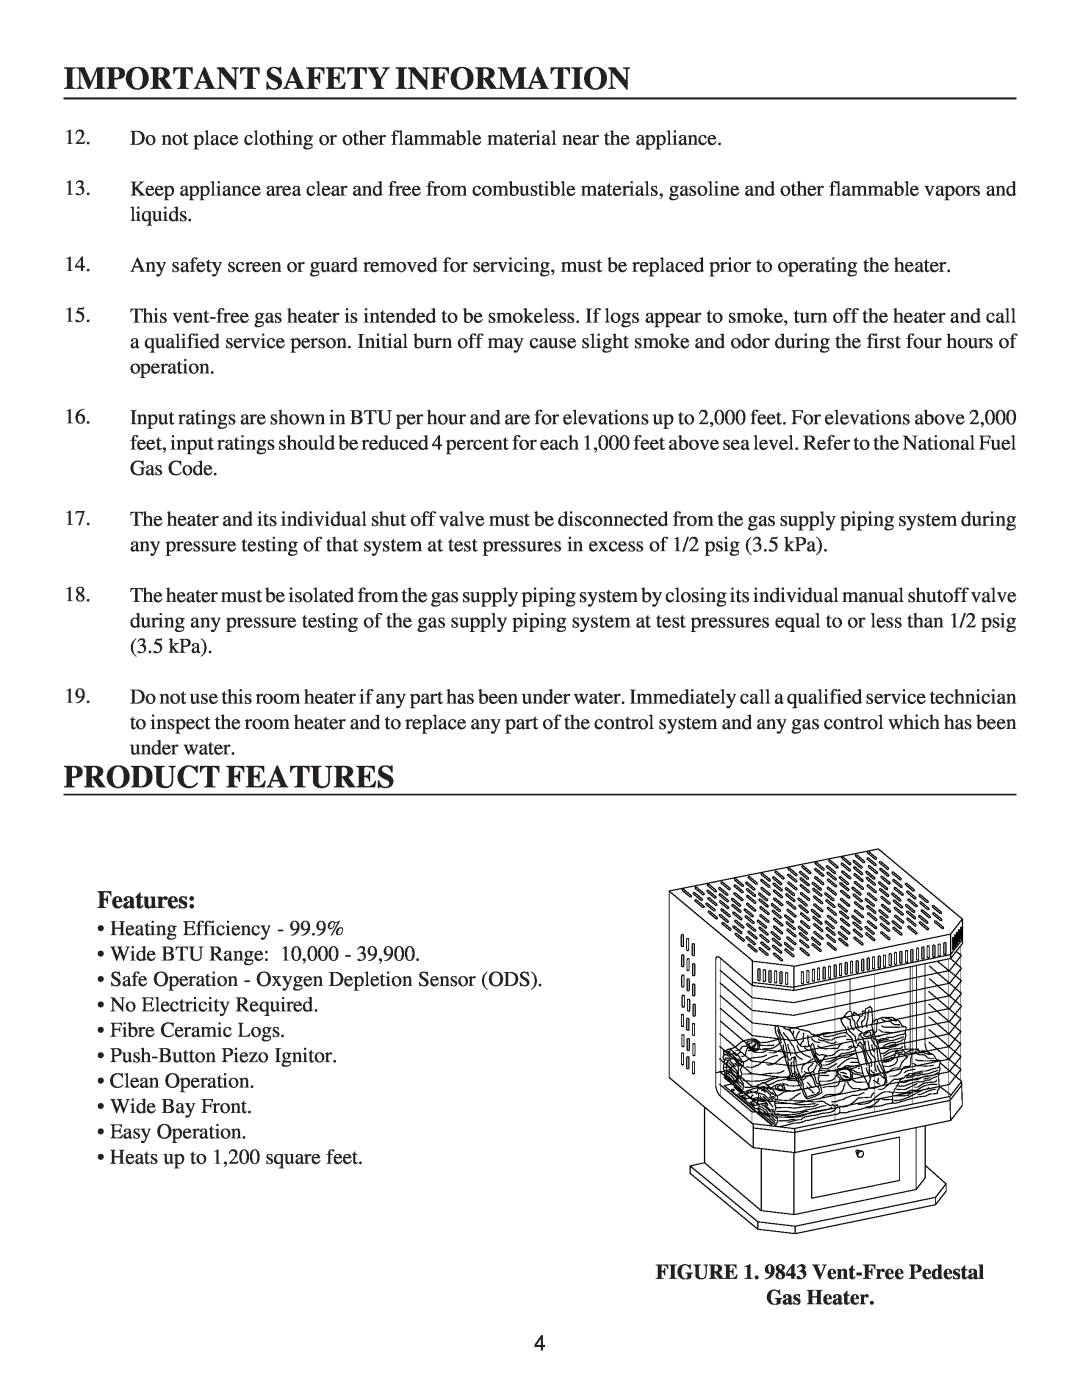 United States Stove G9843N, A9843N manual Product Features, Important Safety Information, 9843 Vent-FreePedestal Gas Heater 